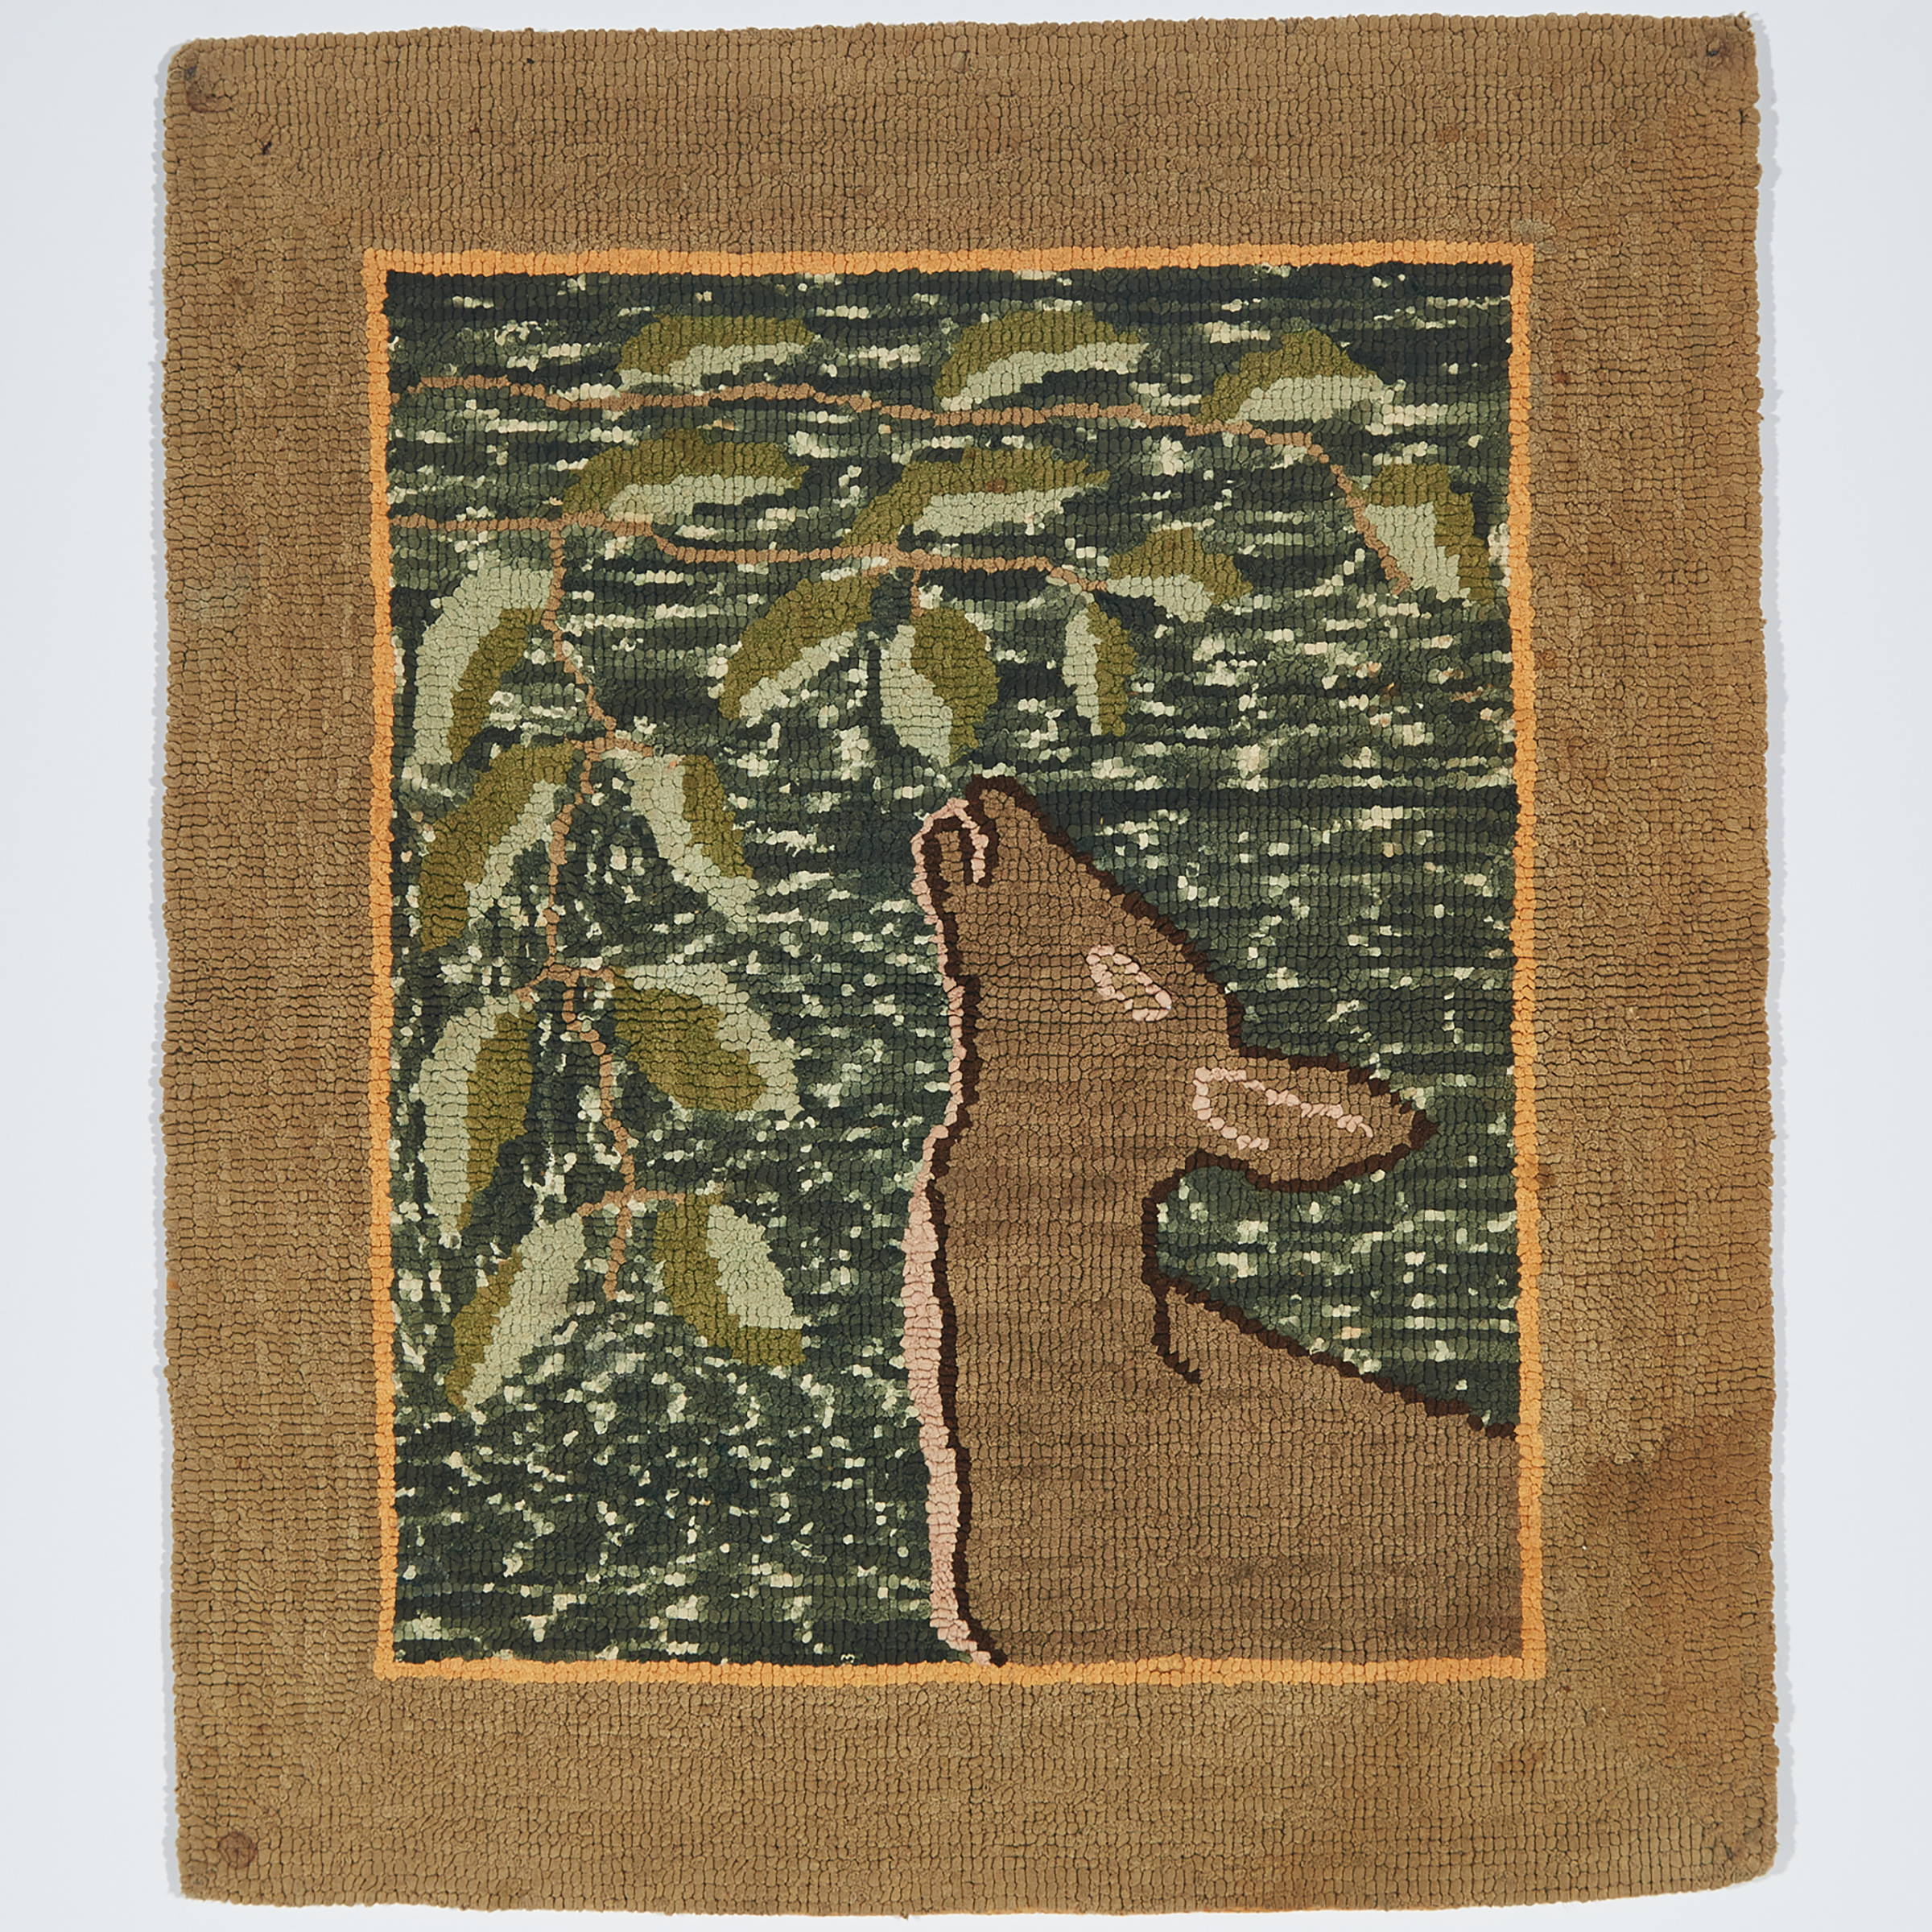 Grenfell Labrador Industries Hooked Mat Depicting a Deer Feeding on the Leaves of a Tree, c.1930